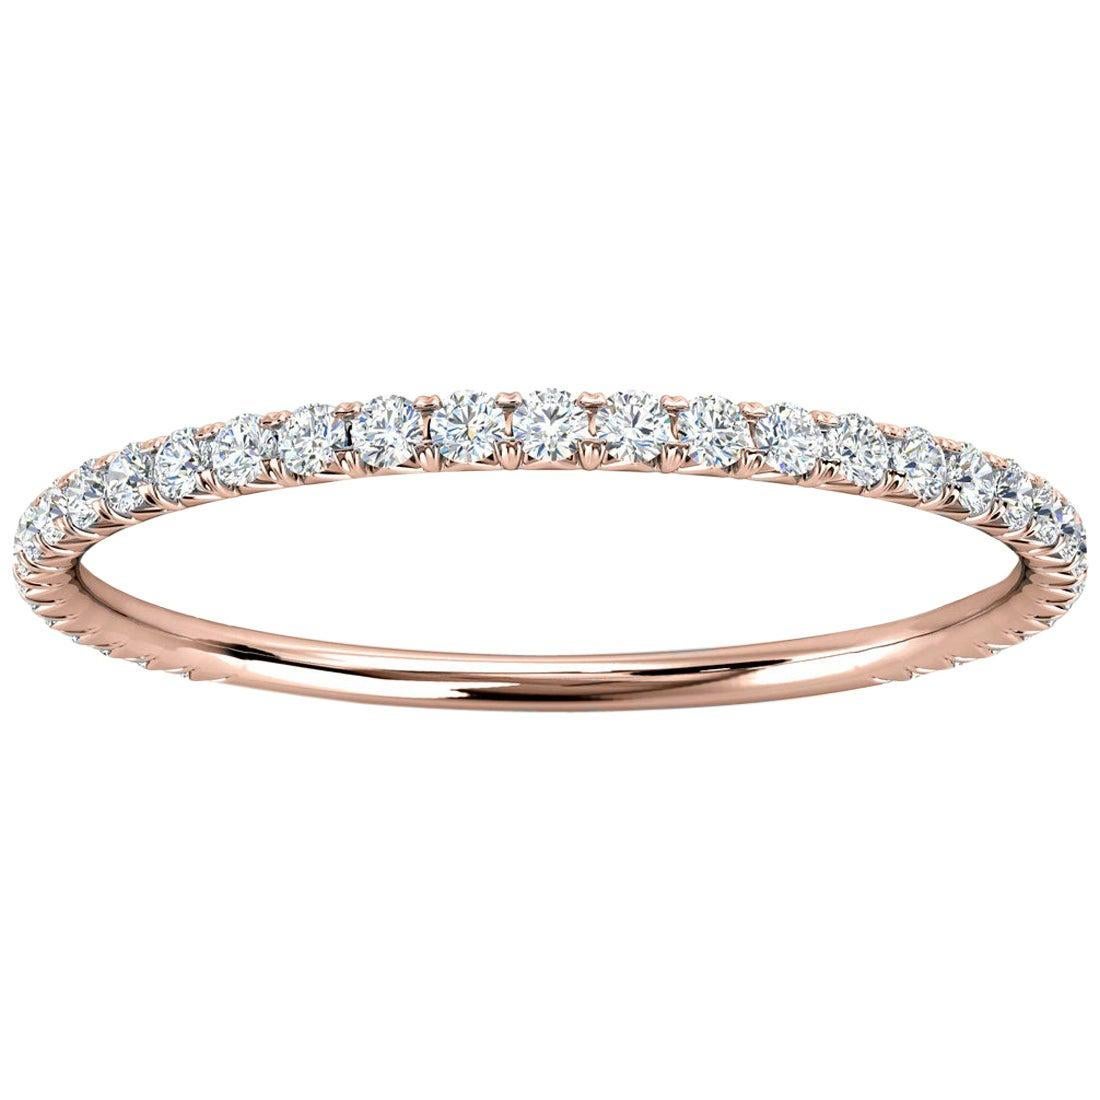 For Sale:  18k Rose Gold Petite GIA French Pave Diamond Ring '1/5 Ct. Tw'